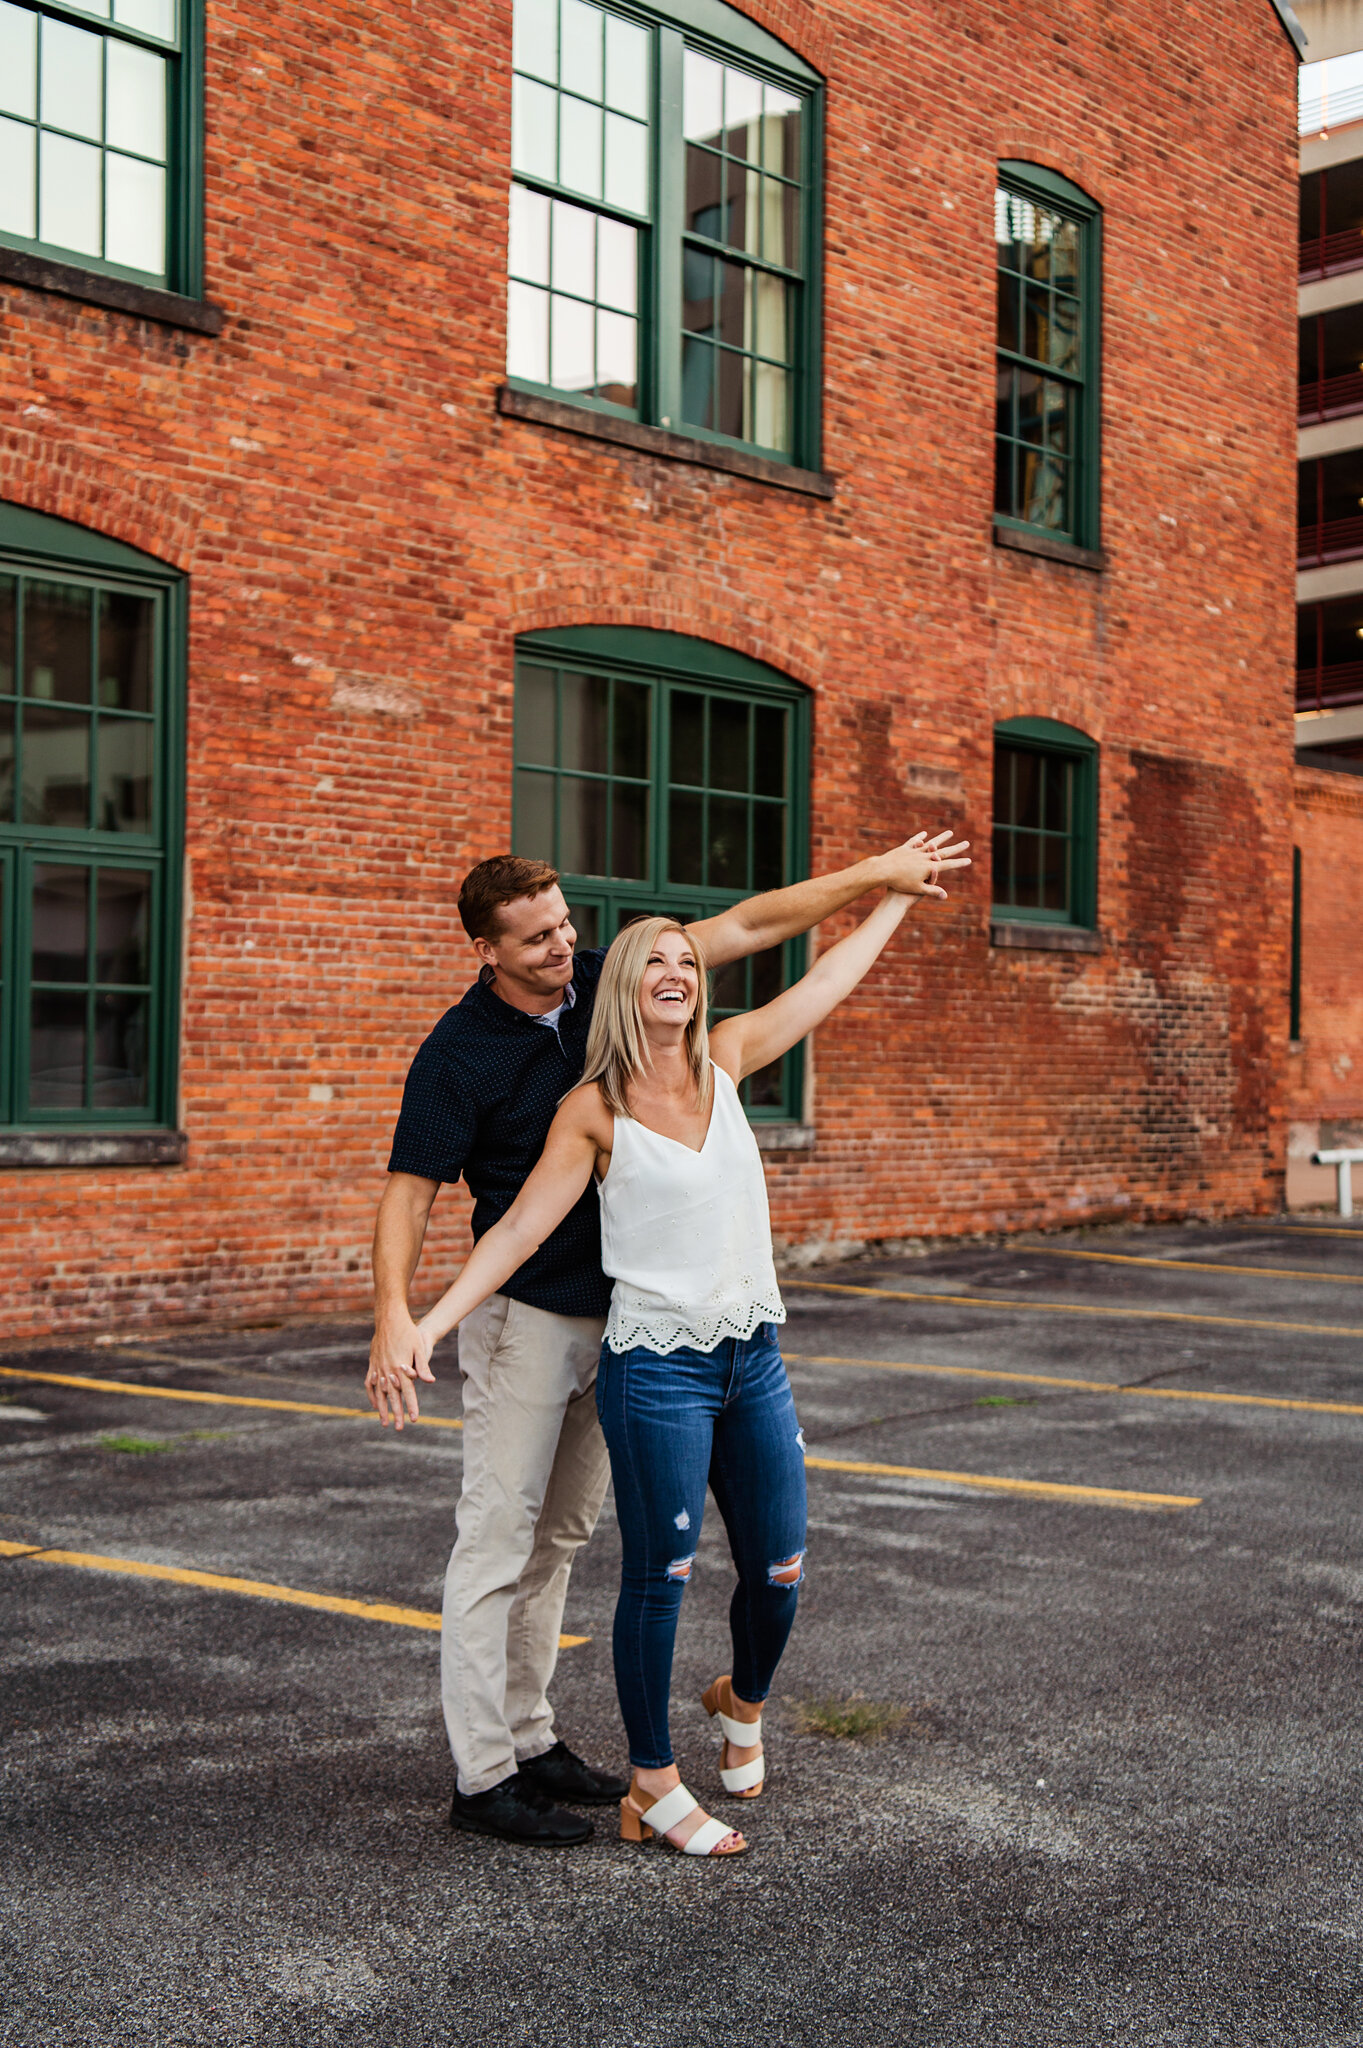 Genesee_Brew_House_High_Falls_Rochester_Engagement_Session_JILL_STUDIO_Rochester_NY_Photographer_5595.jpg